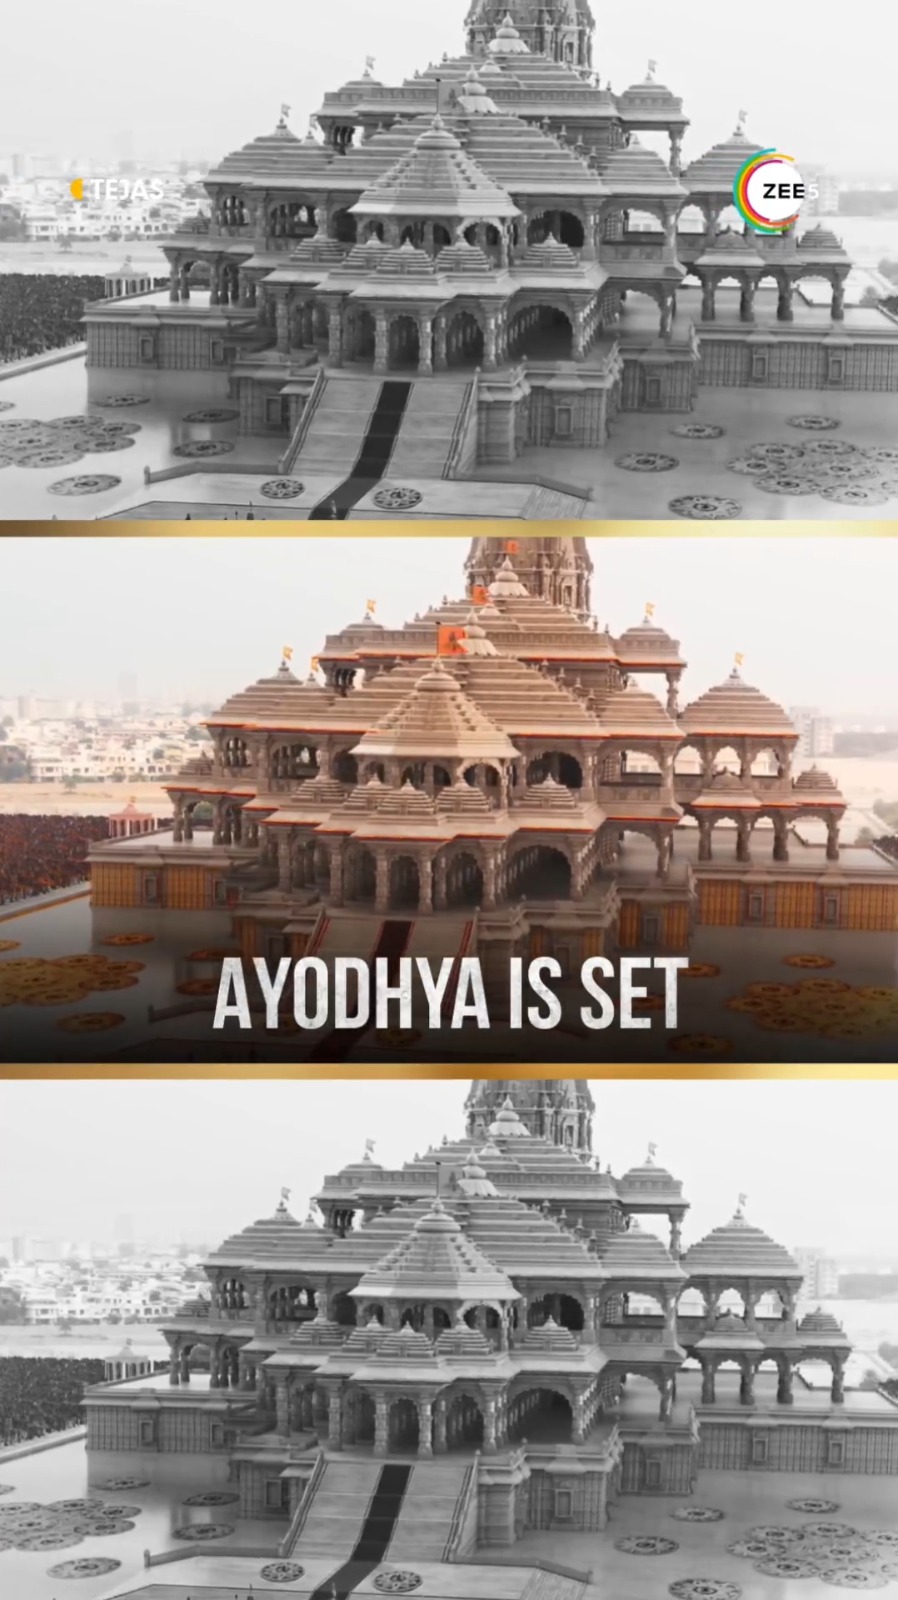 The clock is ticking for Ayodhya!